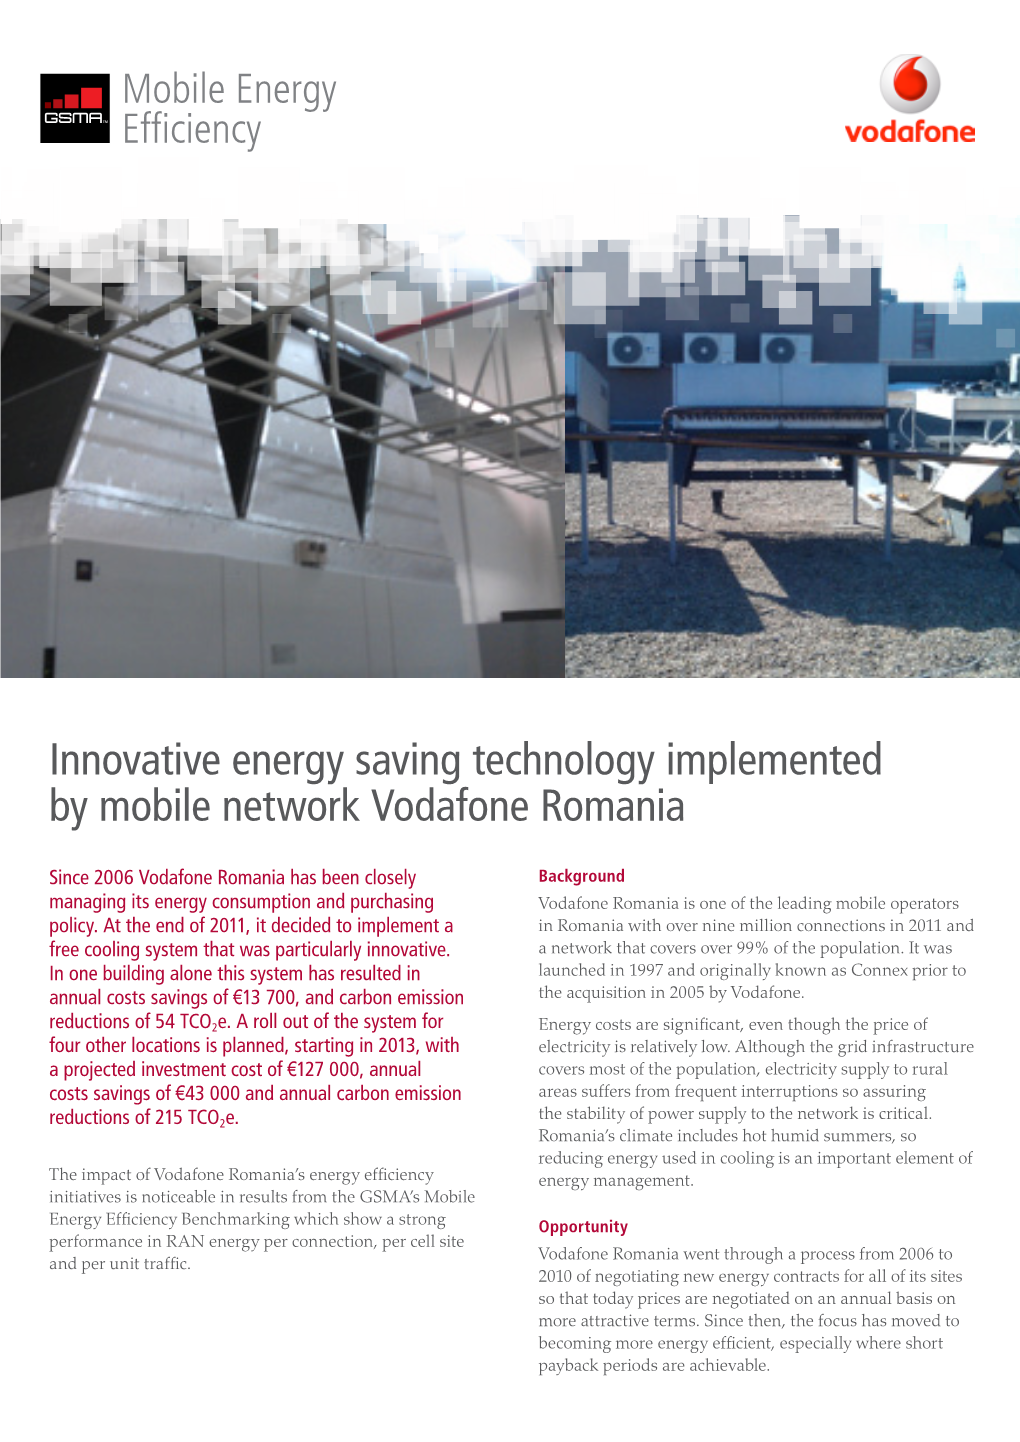 Innovative Energy Saving Technology Implemented by Mobile Network Vodafone Romania